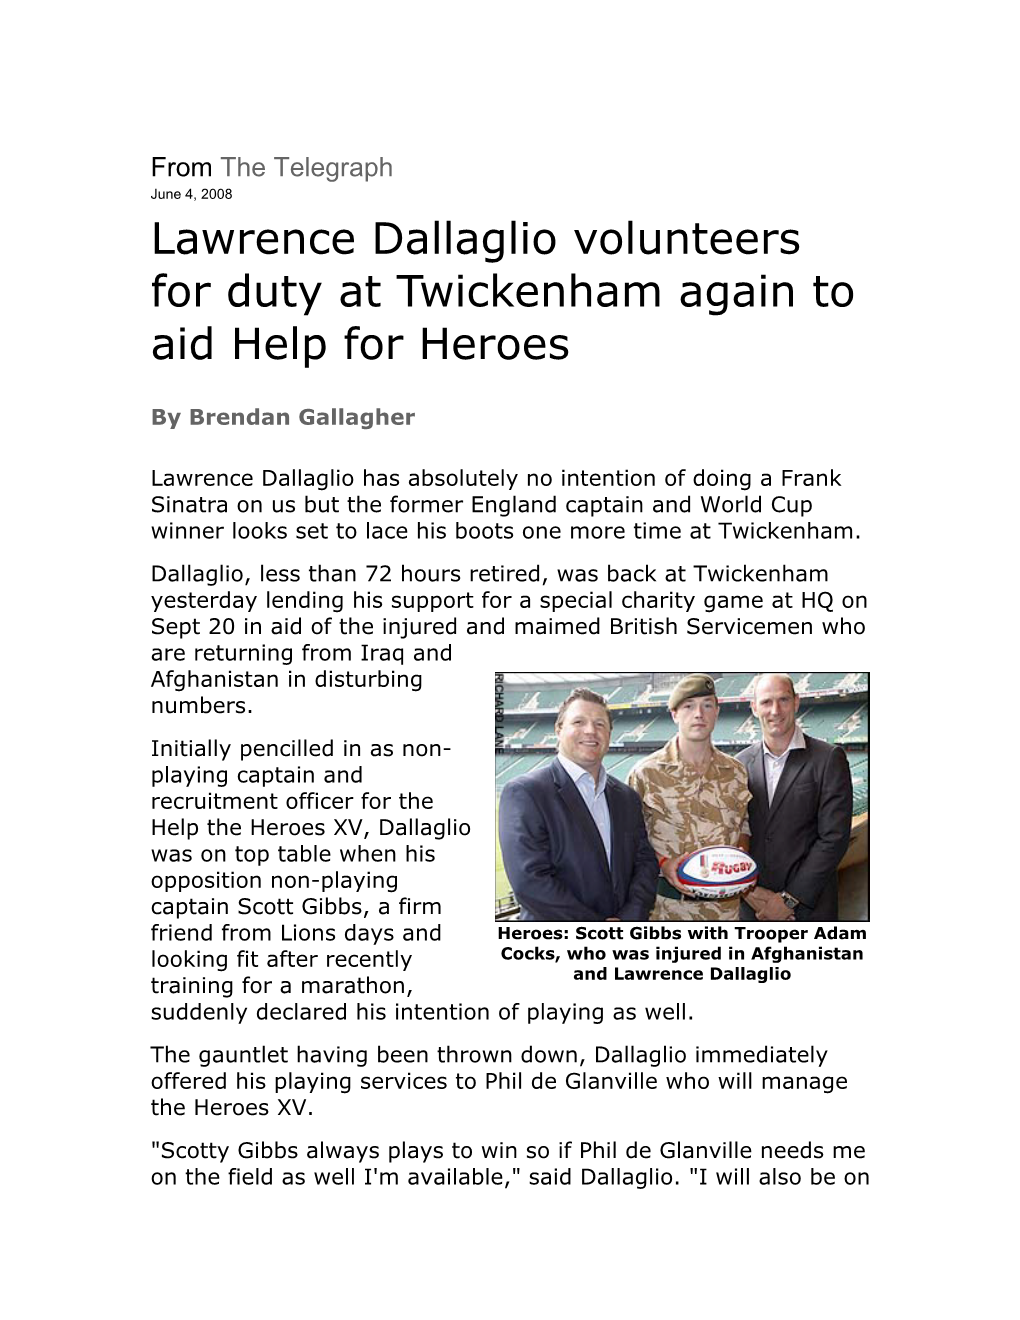 From the Telegraph June 4, 2008 Lawrence Dallaglio Volunteers for Duty at Twickenham Again to Aid Help for Heroes